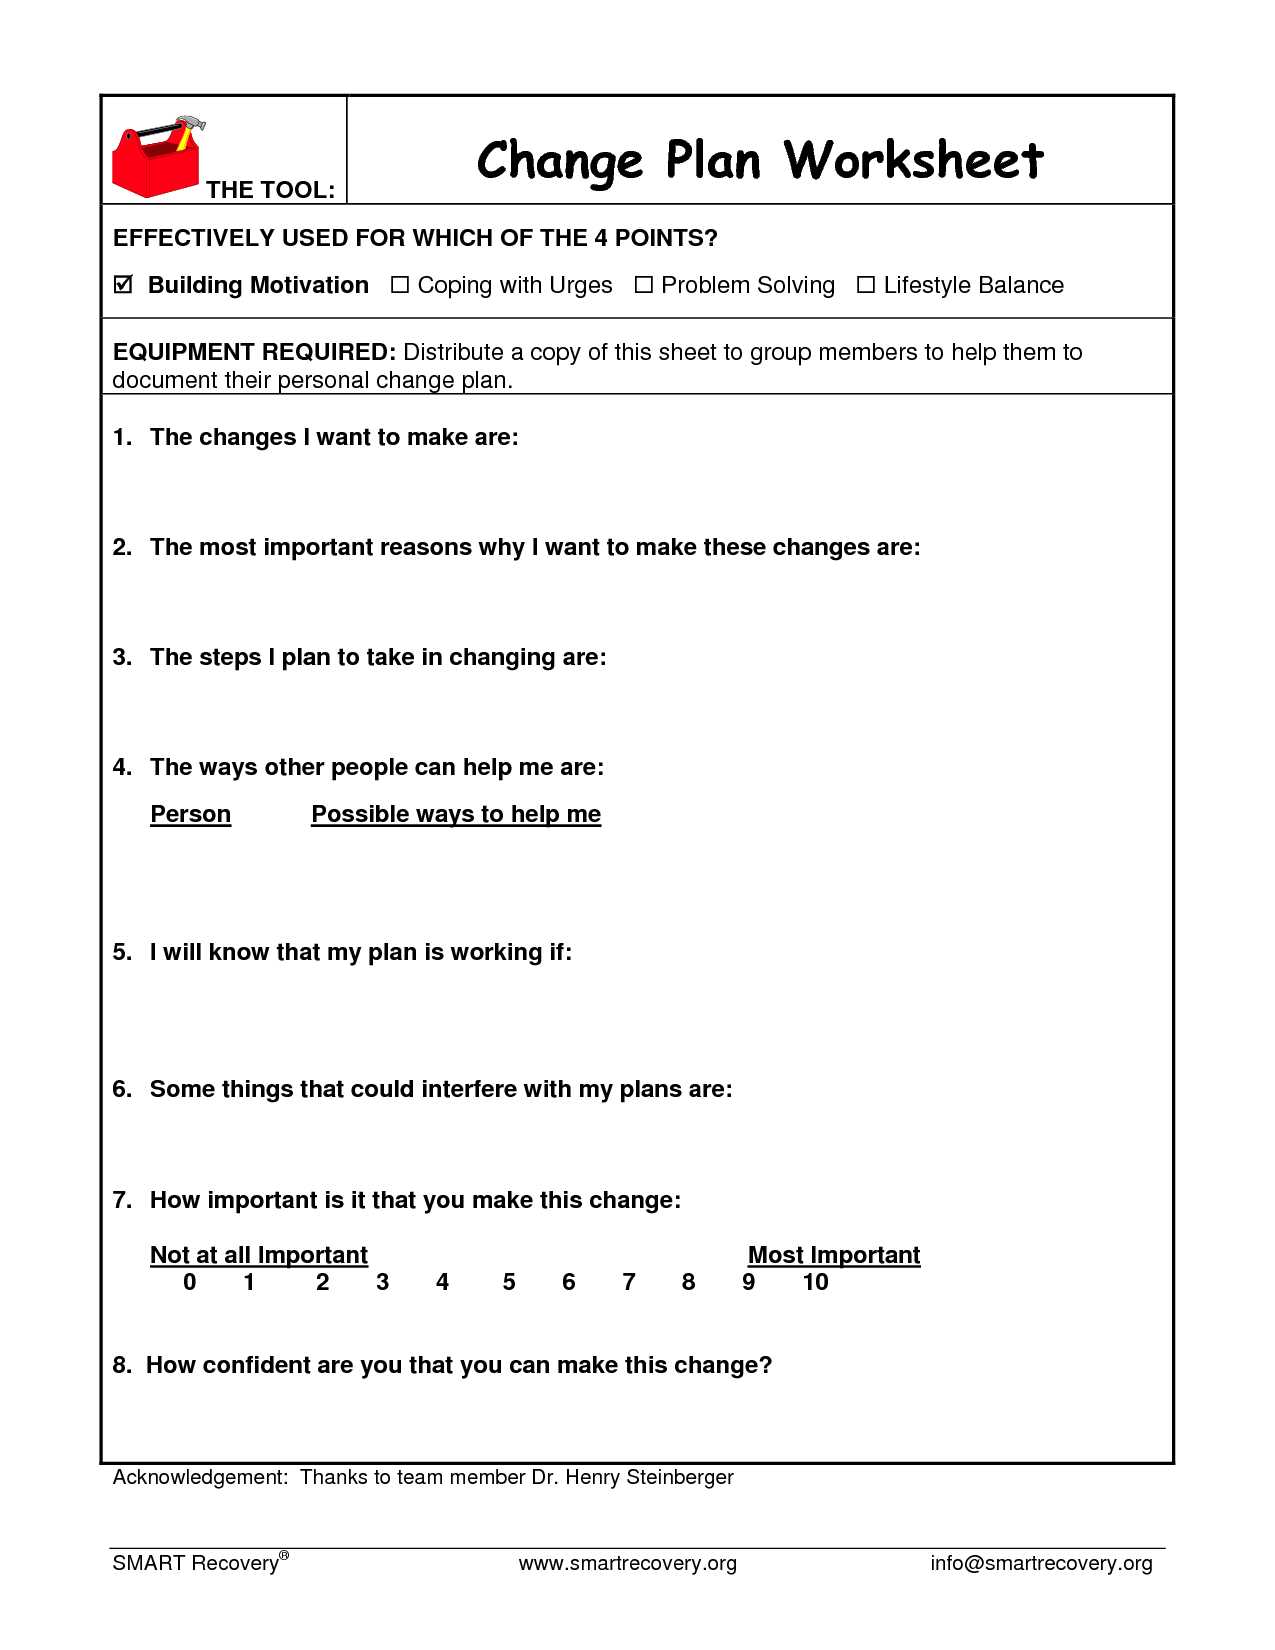 Wellness Recovery Action Plan Worksheets Also Image Result for Motivational Interviewing Worksheets